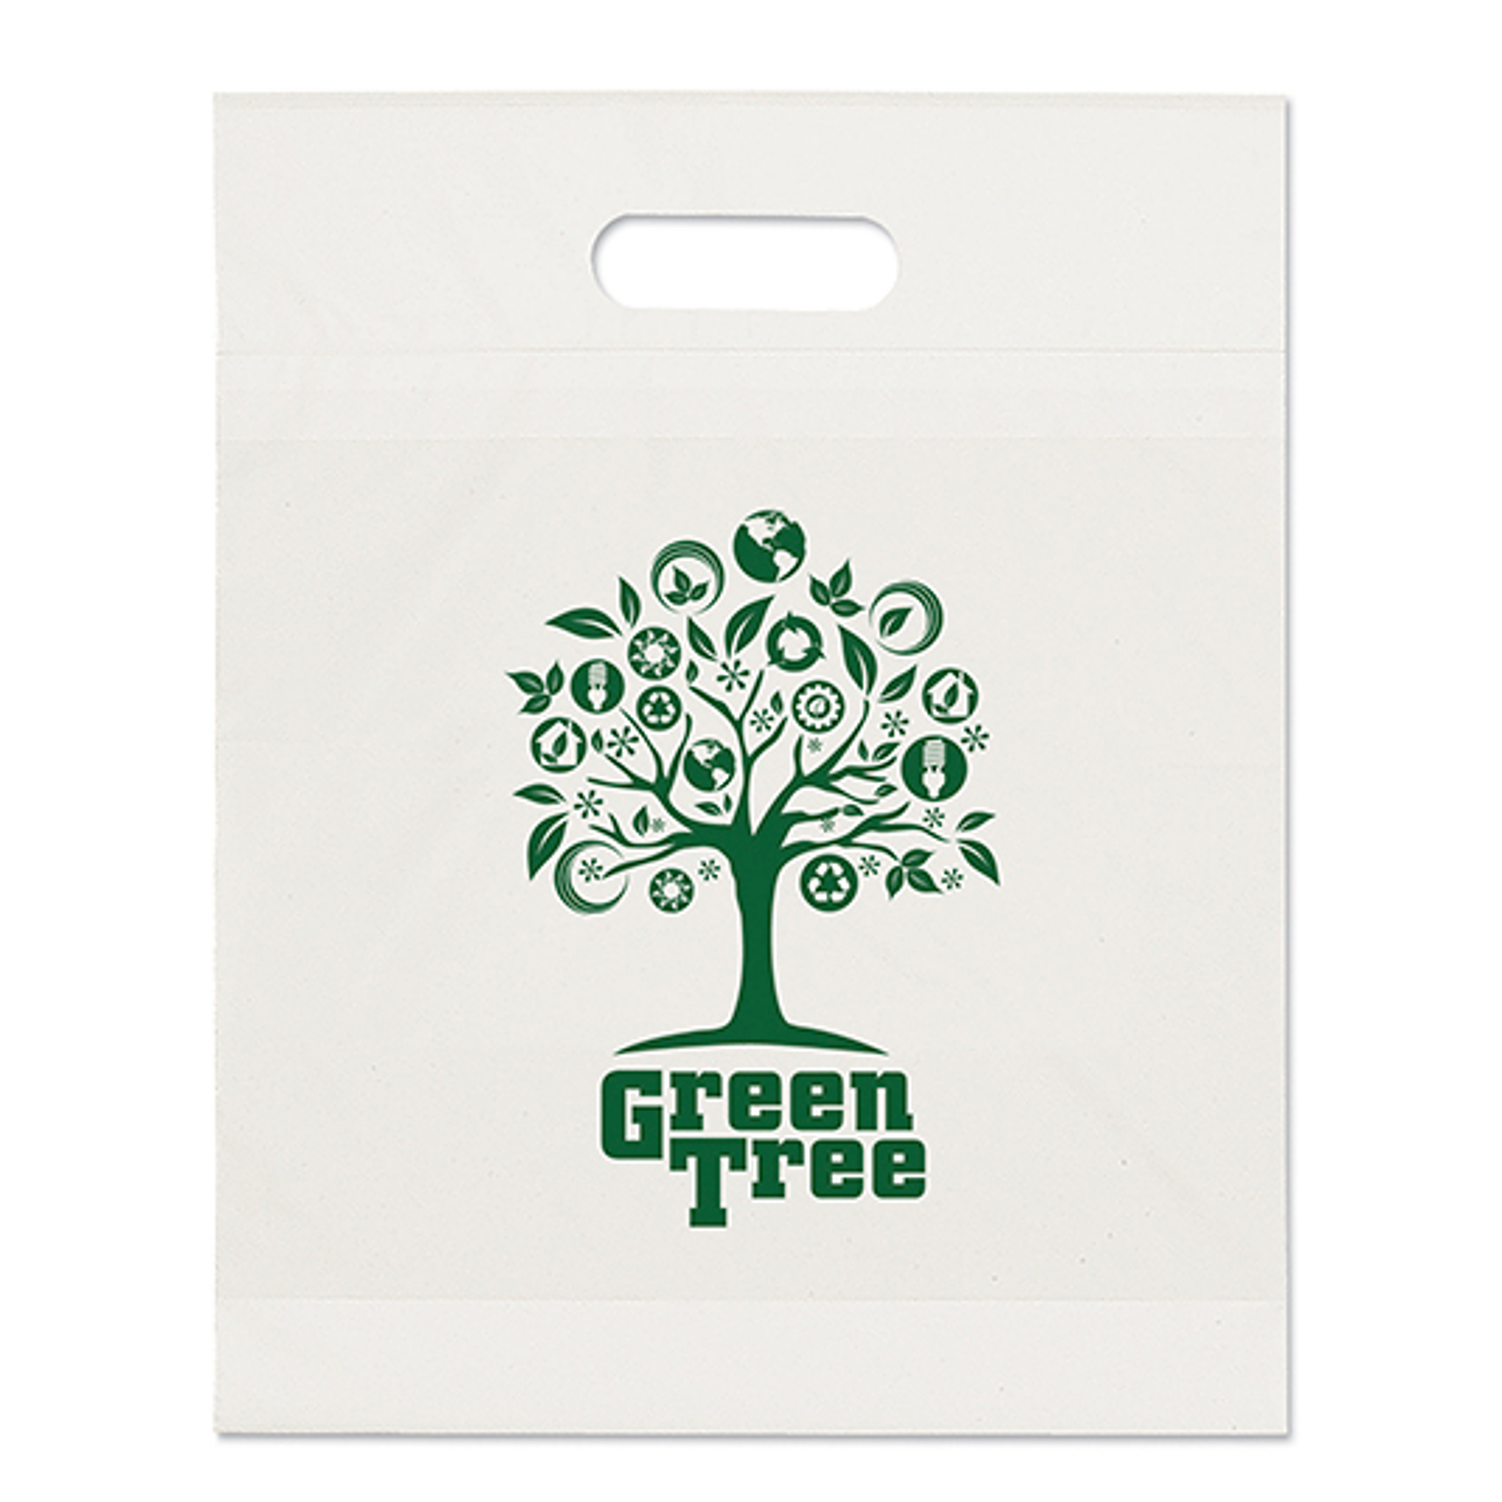 Recycled Plastic Handle Bag | Sizes: 12x15x3 